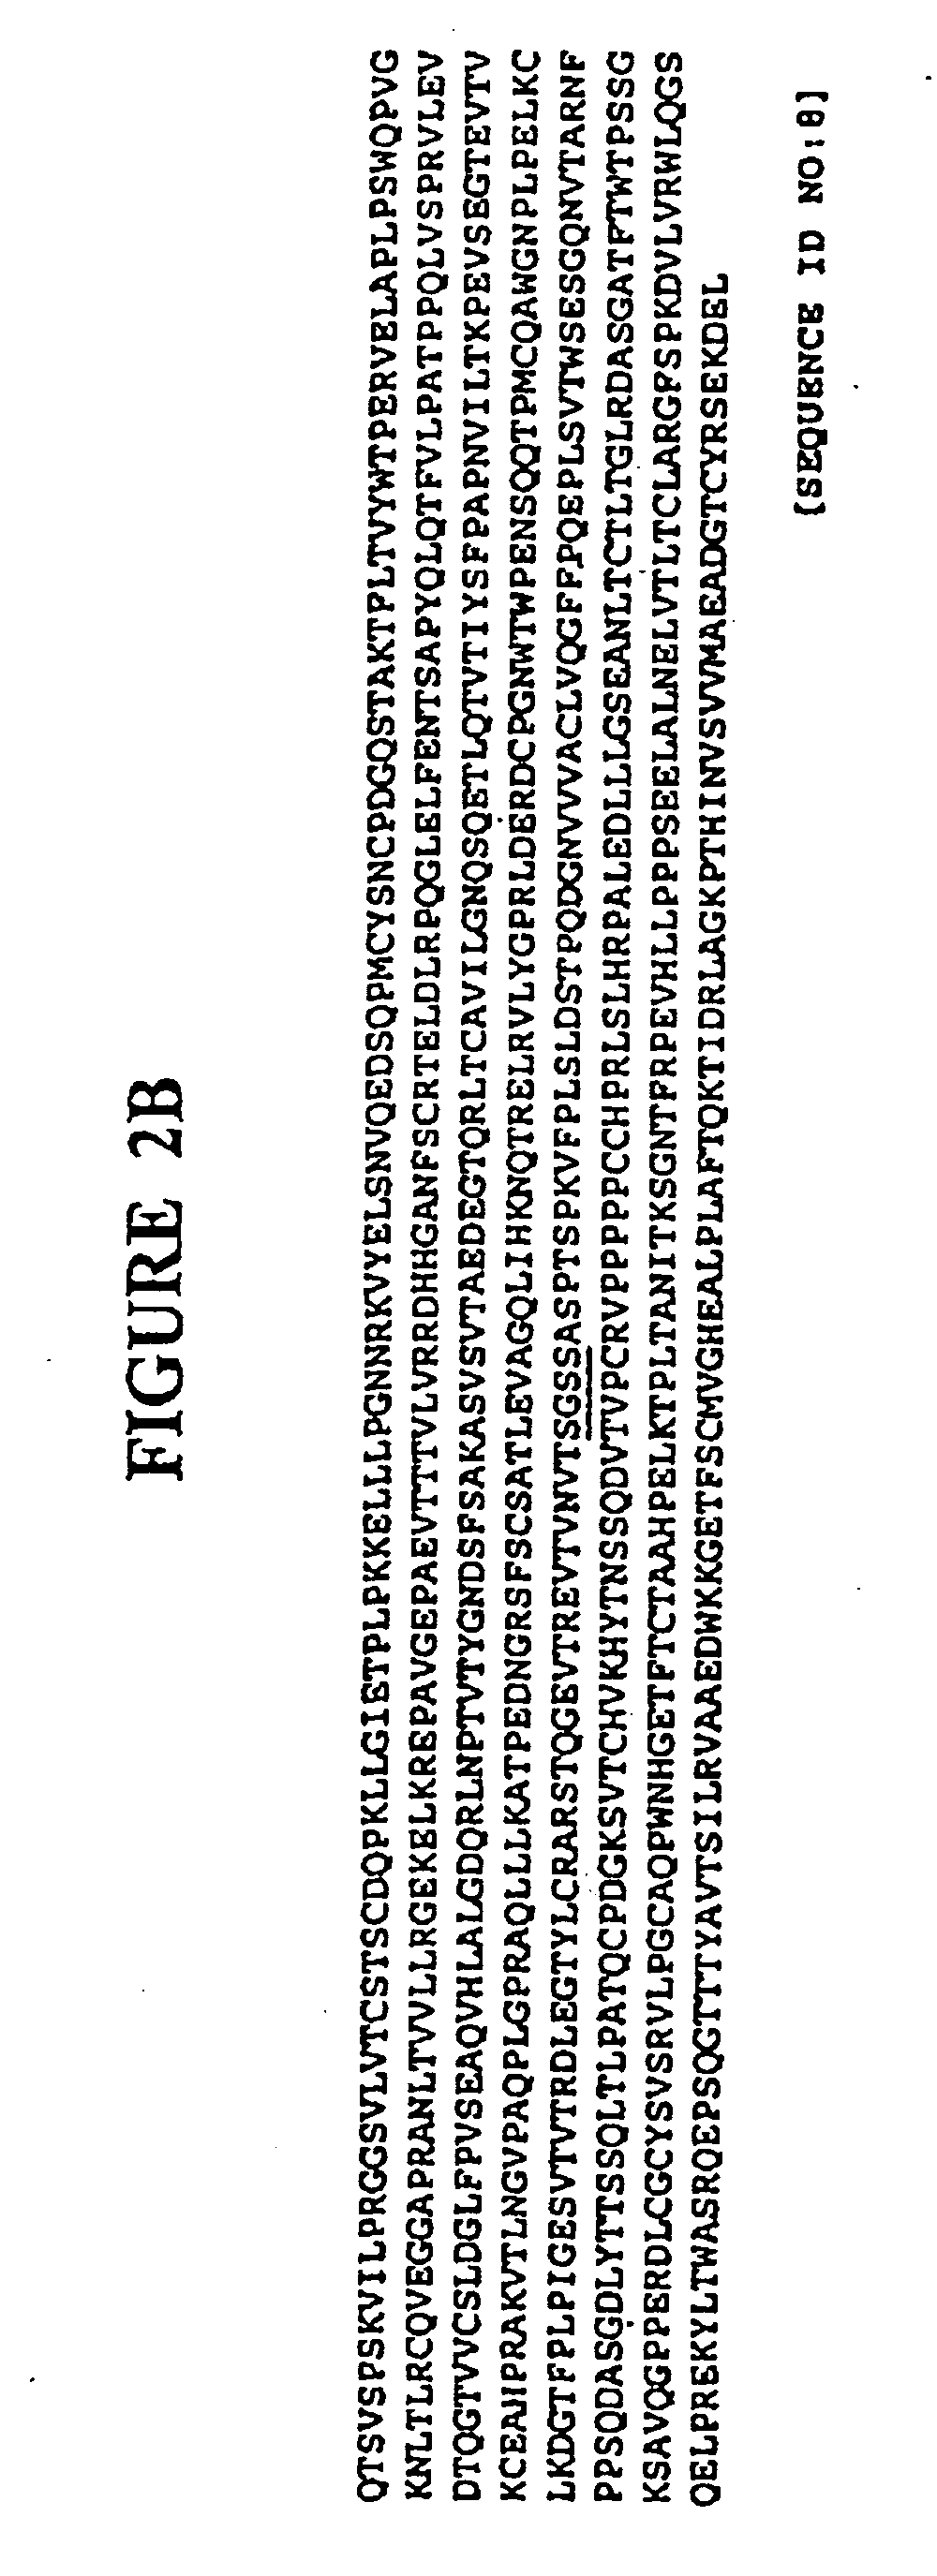 Chimeric toxin receptor proteins and chimeric toxin receptor proteins for treatment and prevention of anthrax